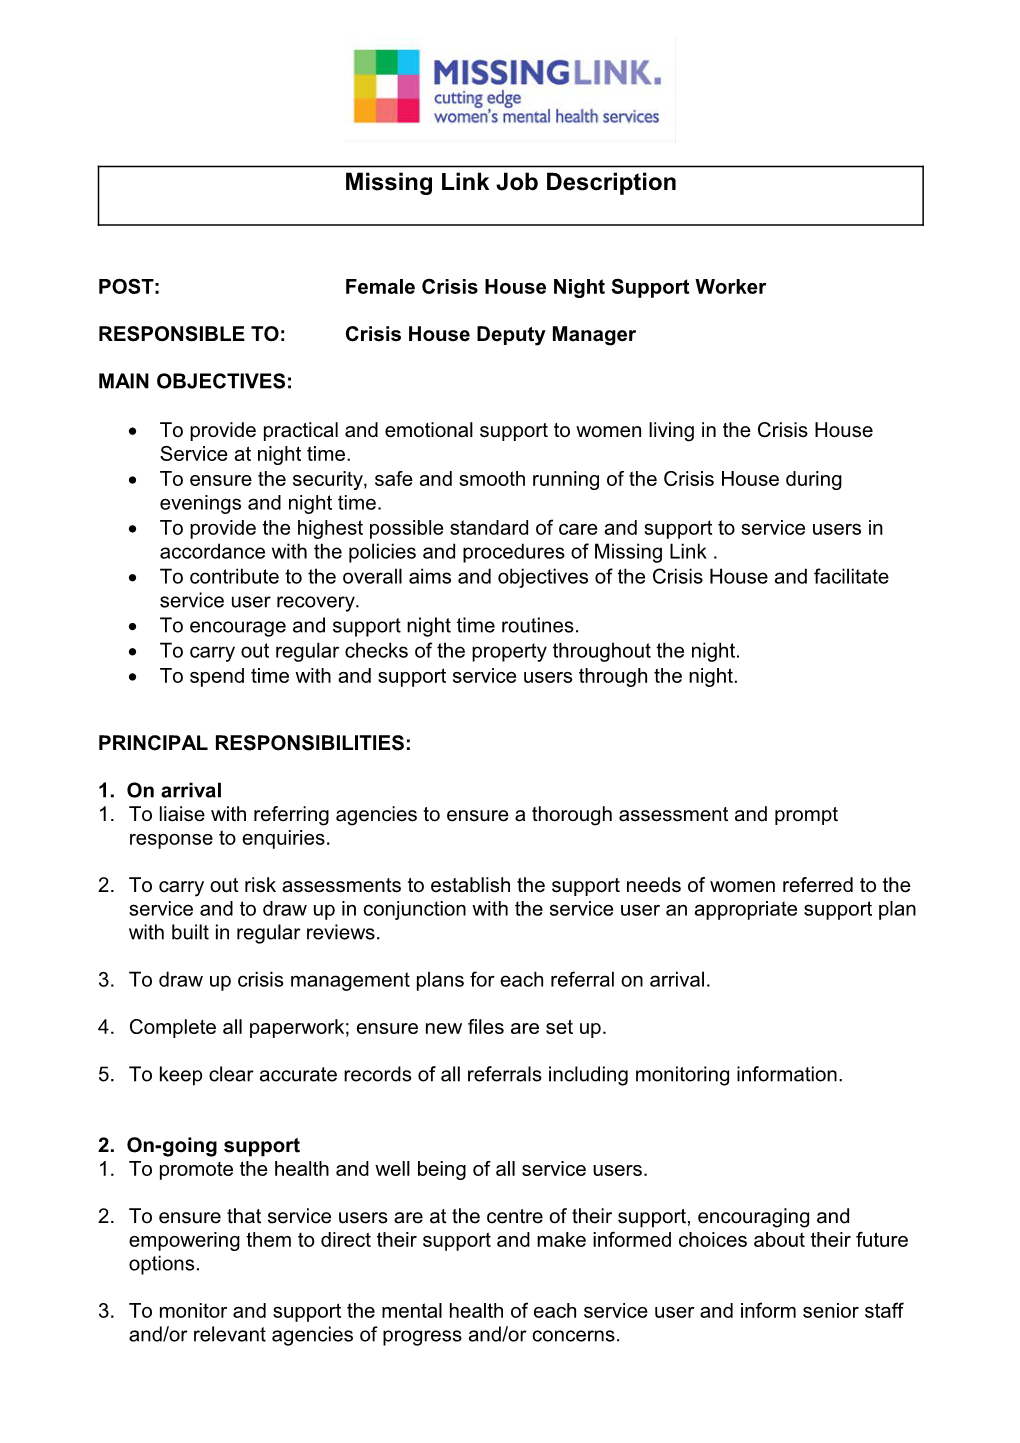 POST:Female Crisis House Night Support Worker